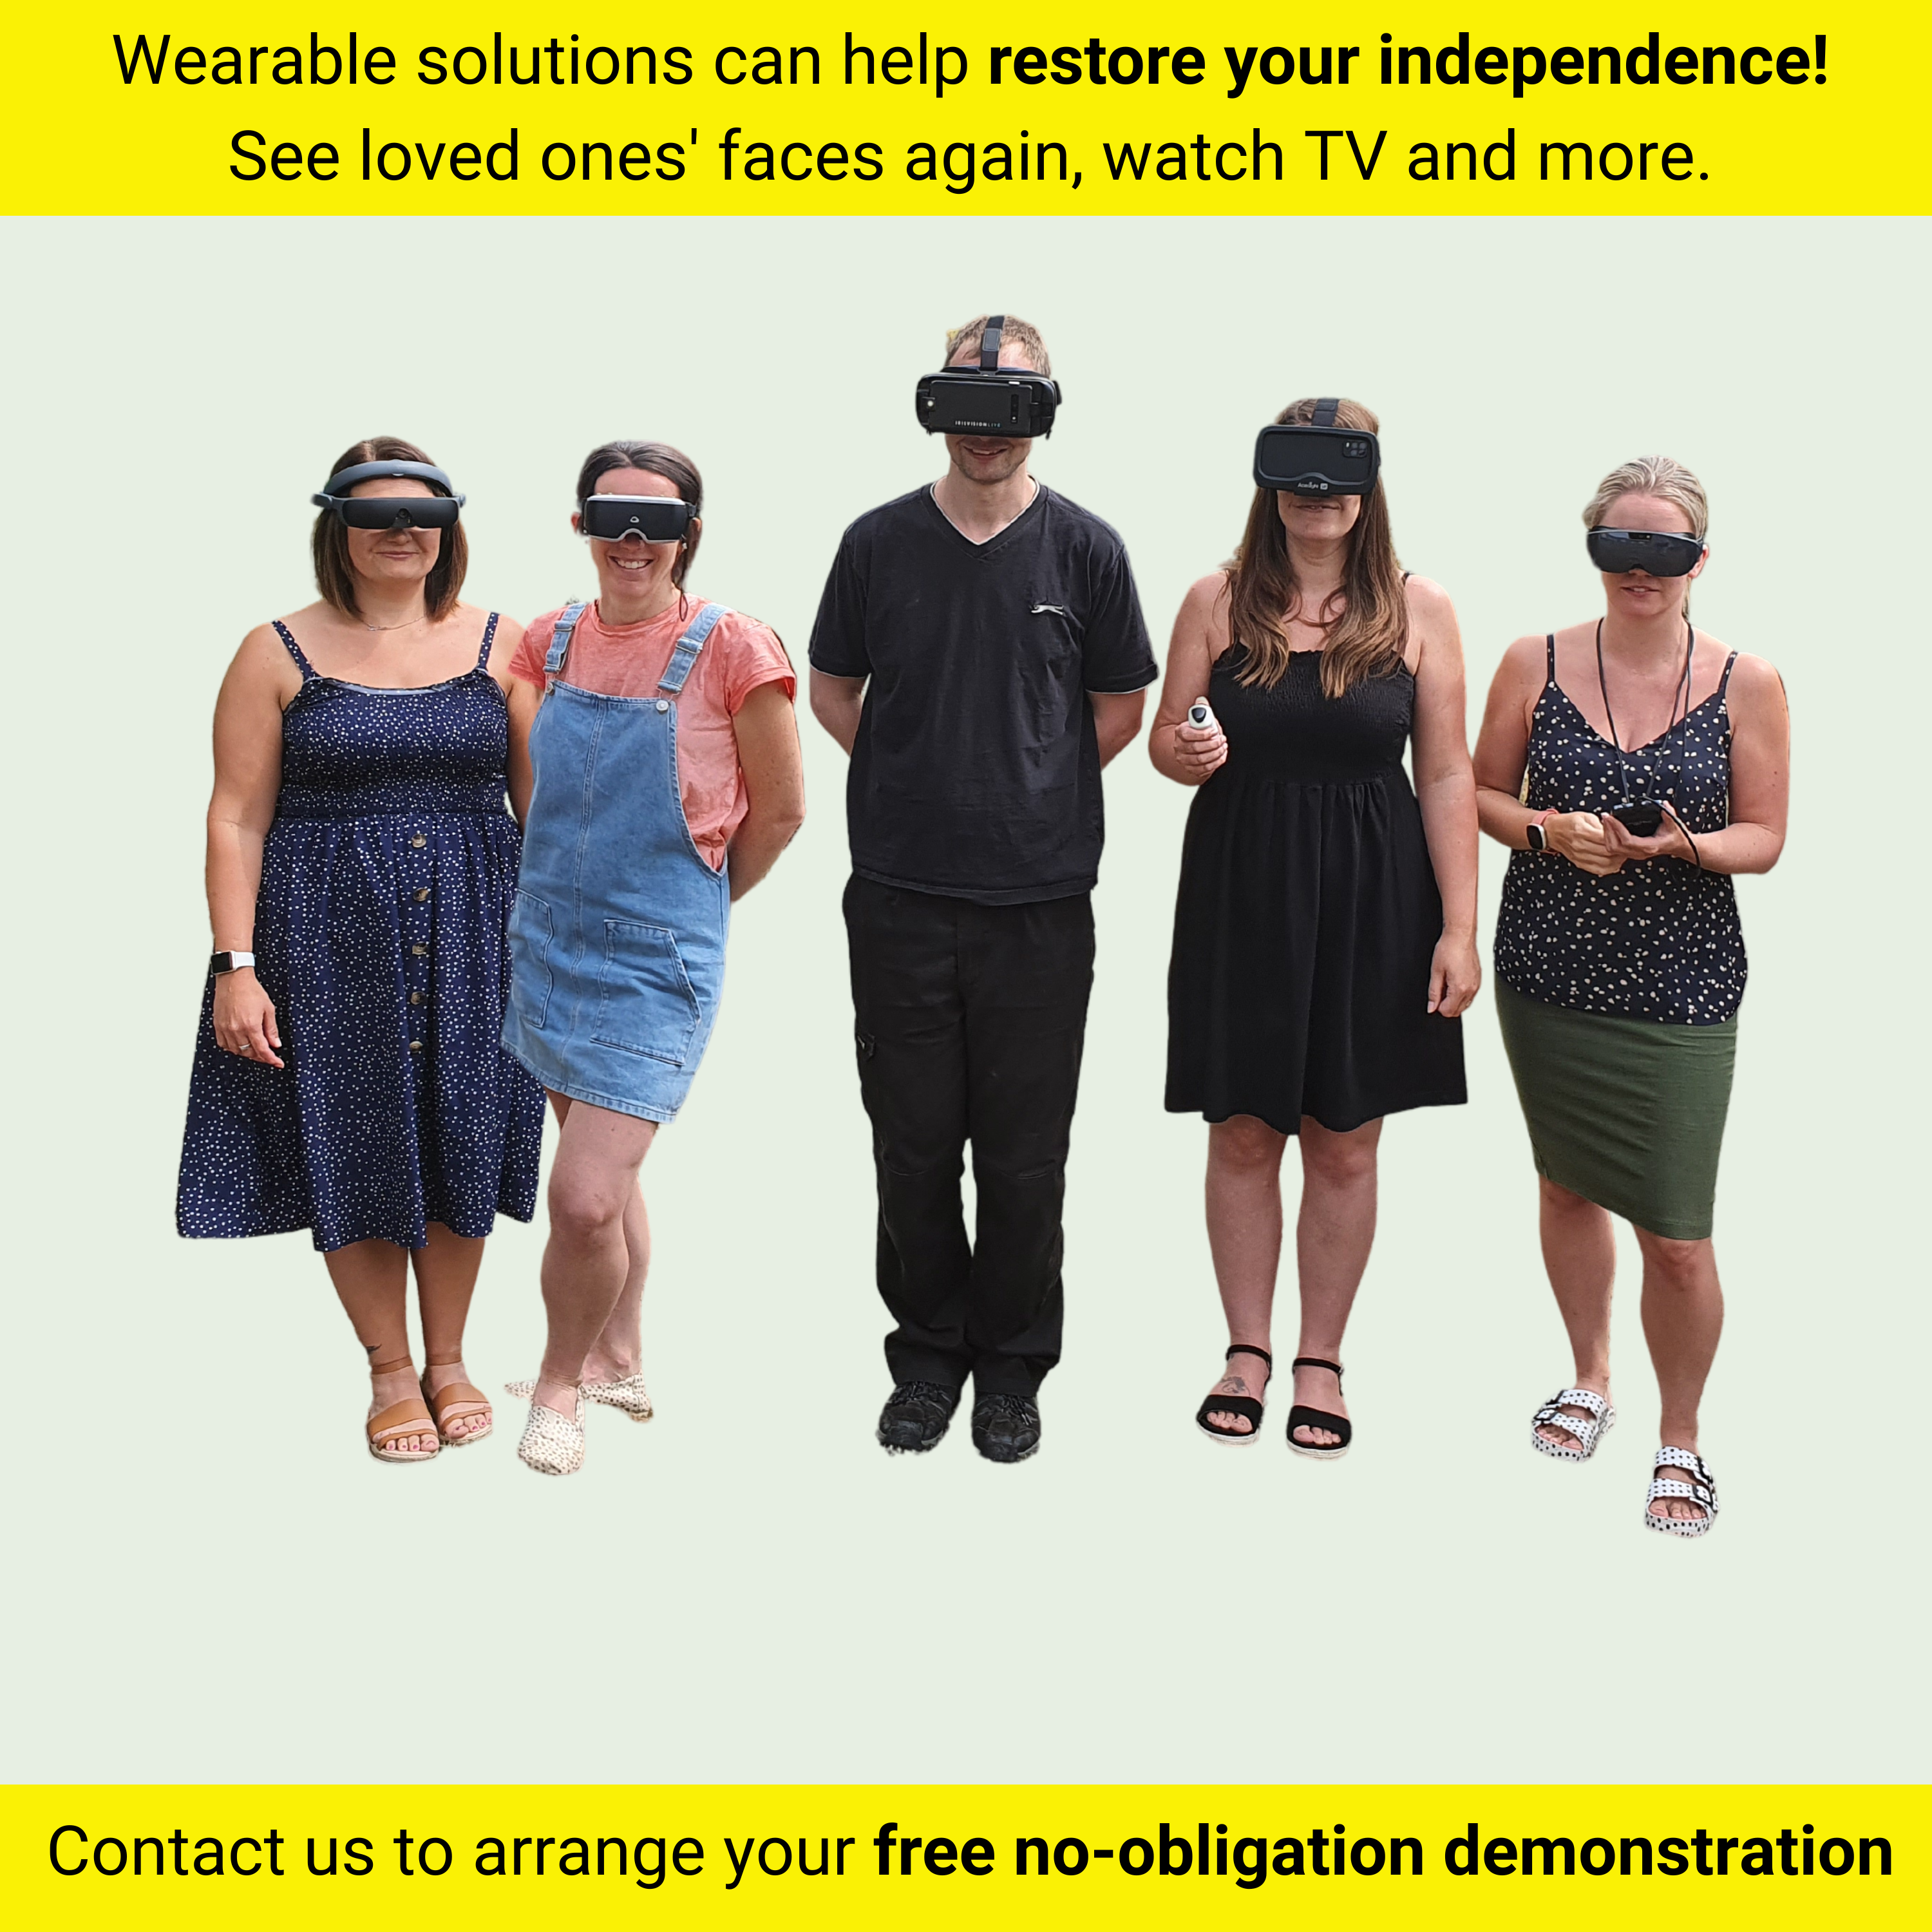 Wearable magnifiers can help restore your independence! See loved ones' faces again, watch TV and more.